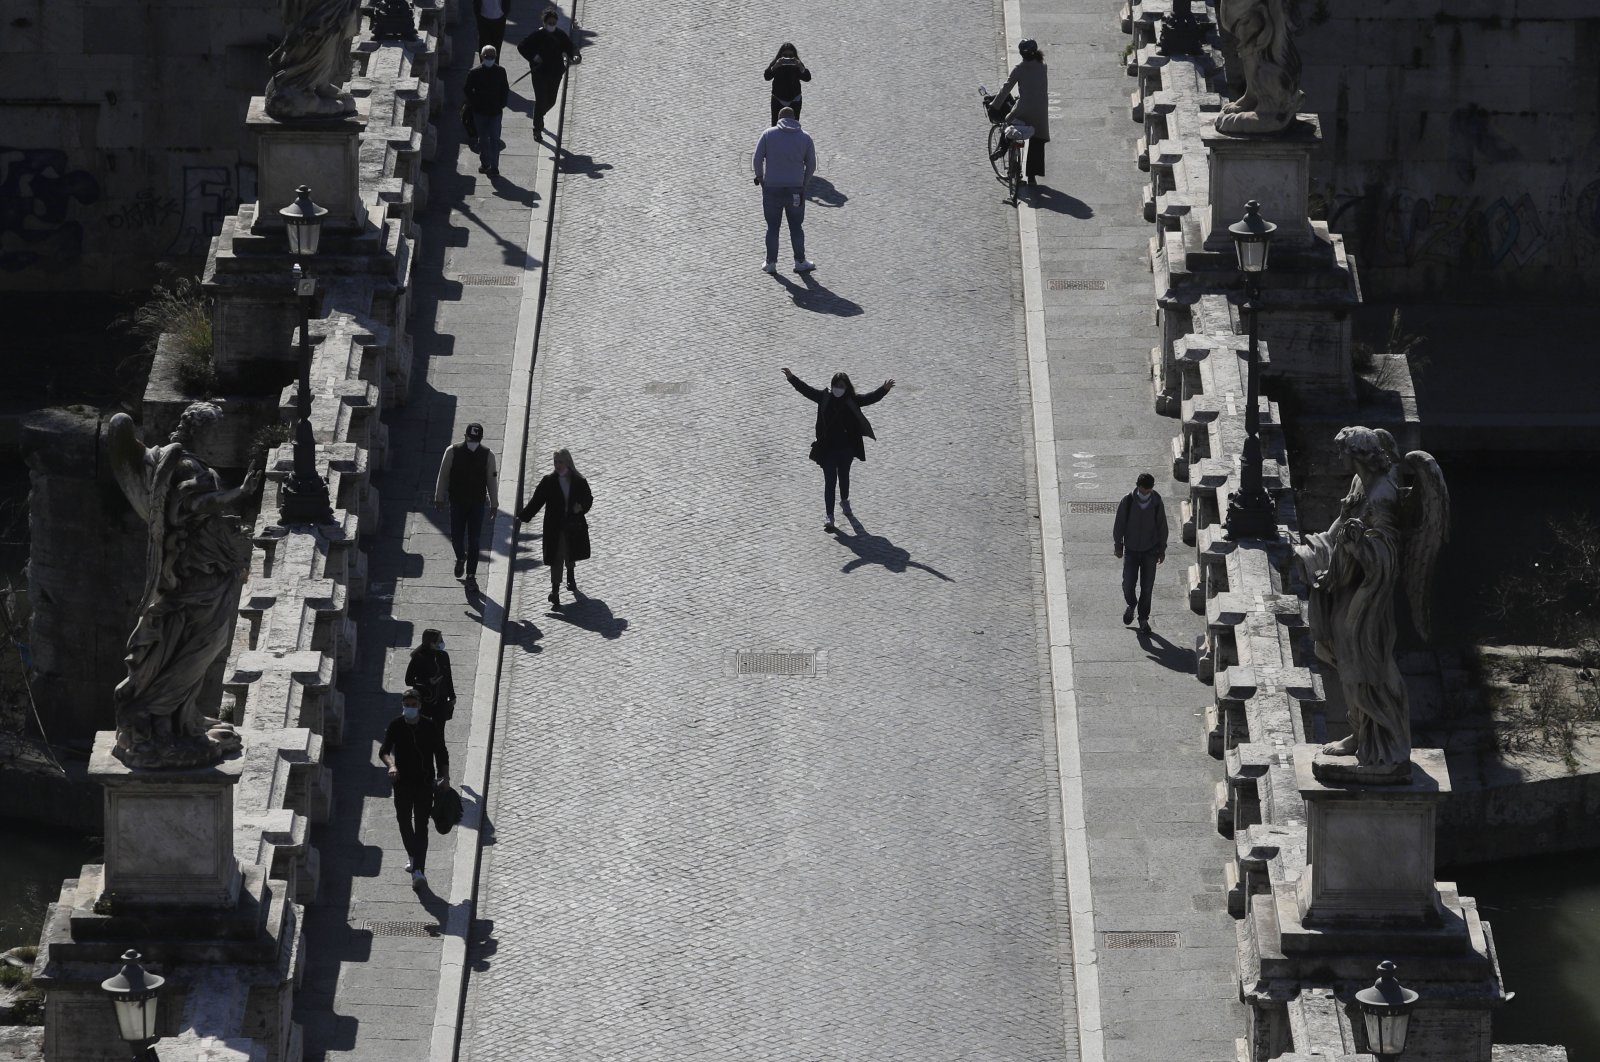 People stroll along the Sant'Angelo Bridge in Rome, Tuesday, March 2, 2021. (AP Photo)